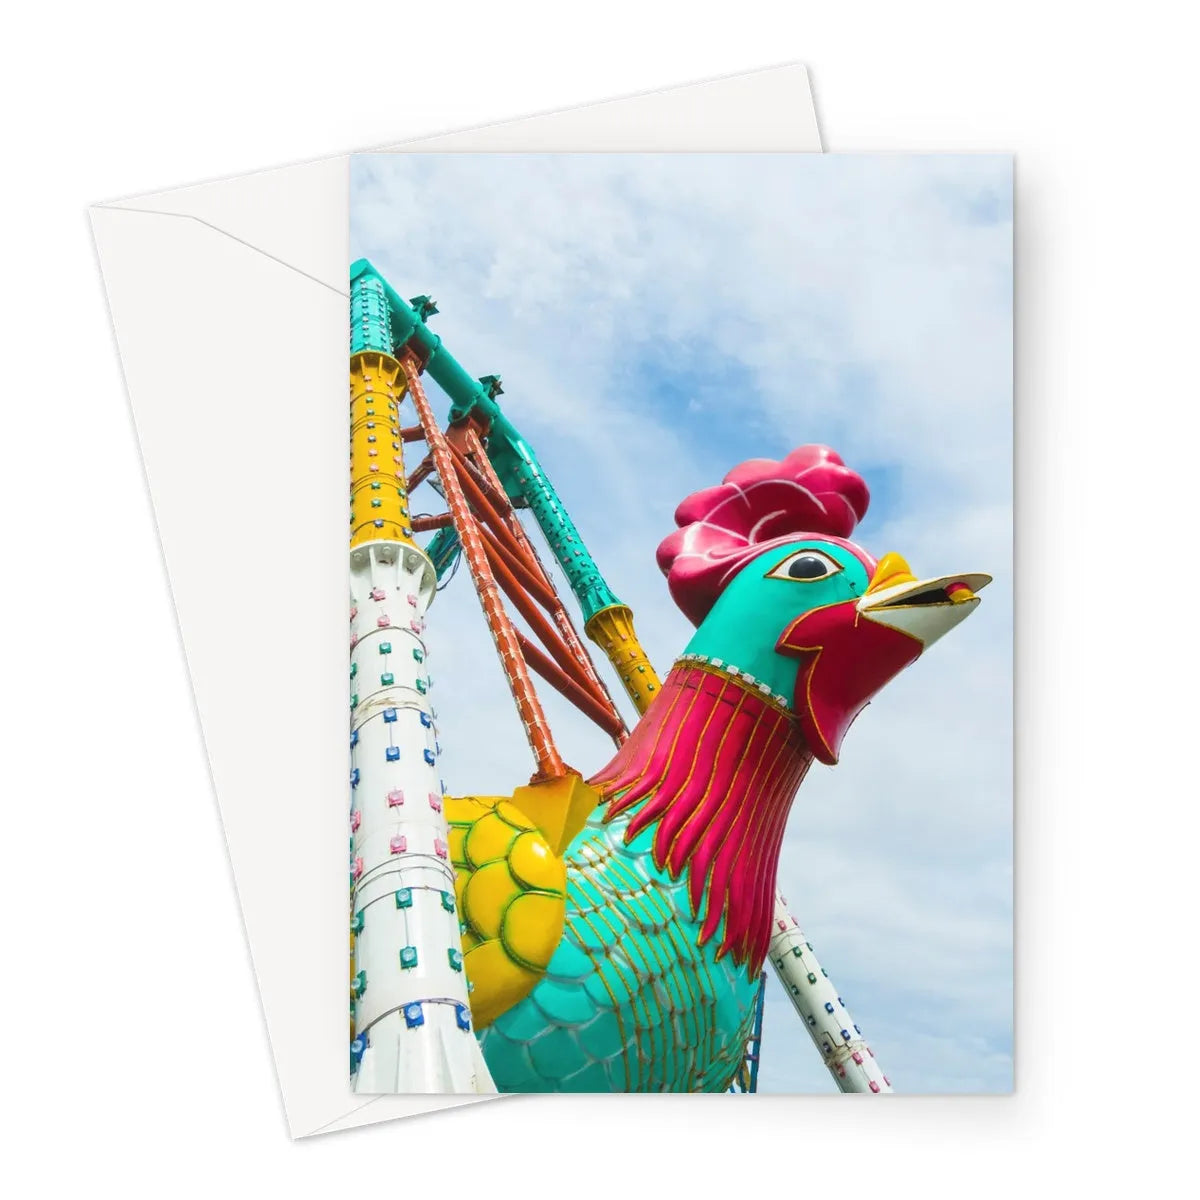 Rise And Shine Greeting Card - A5 Portrait / 1 Card - Greeting & Note Cards - Aesthetic Art